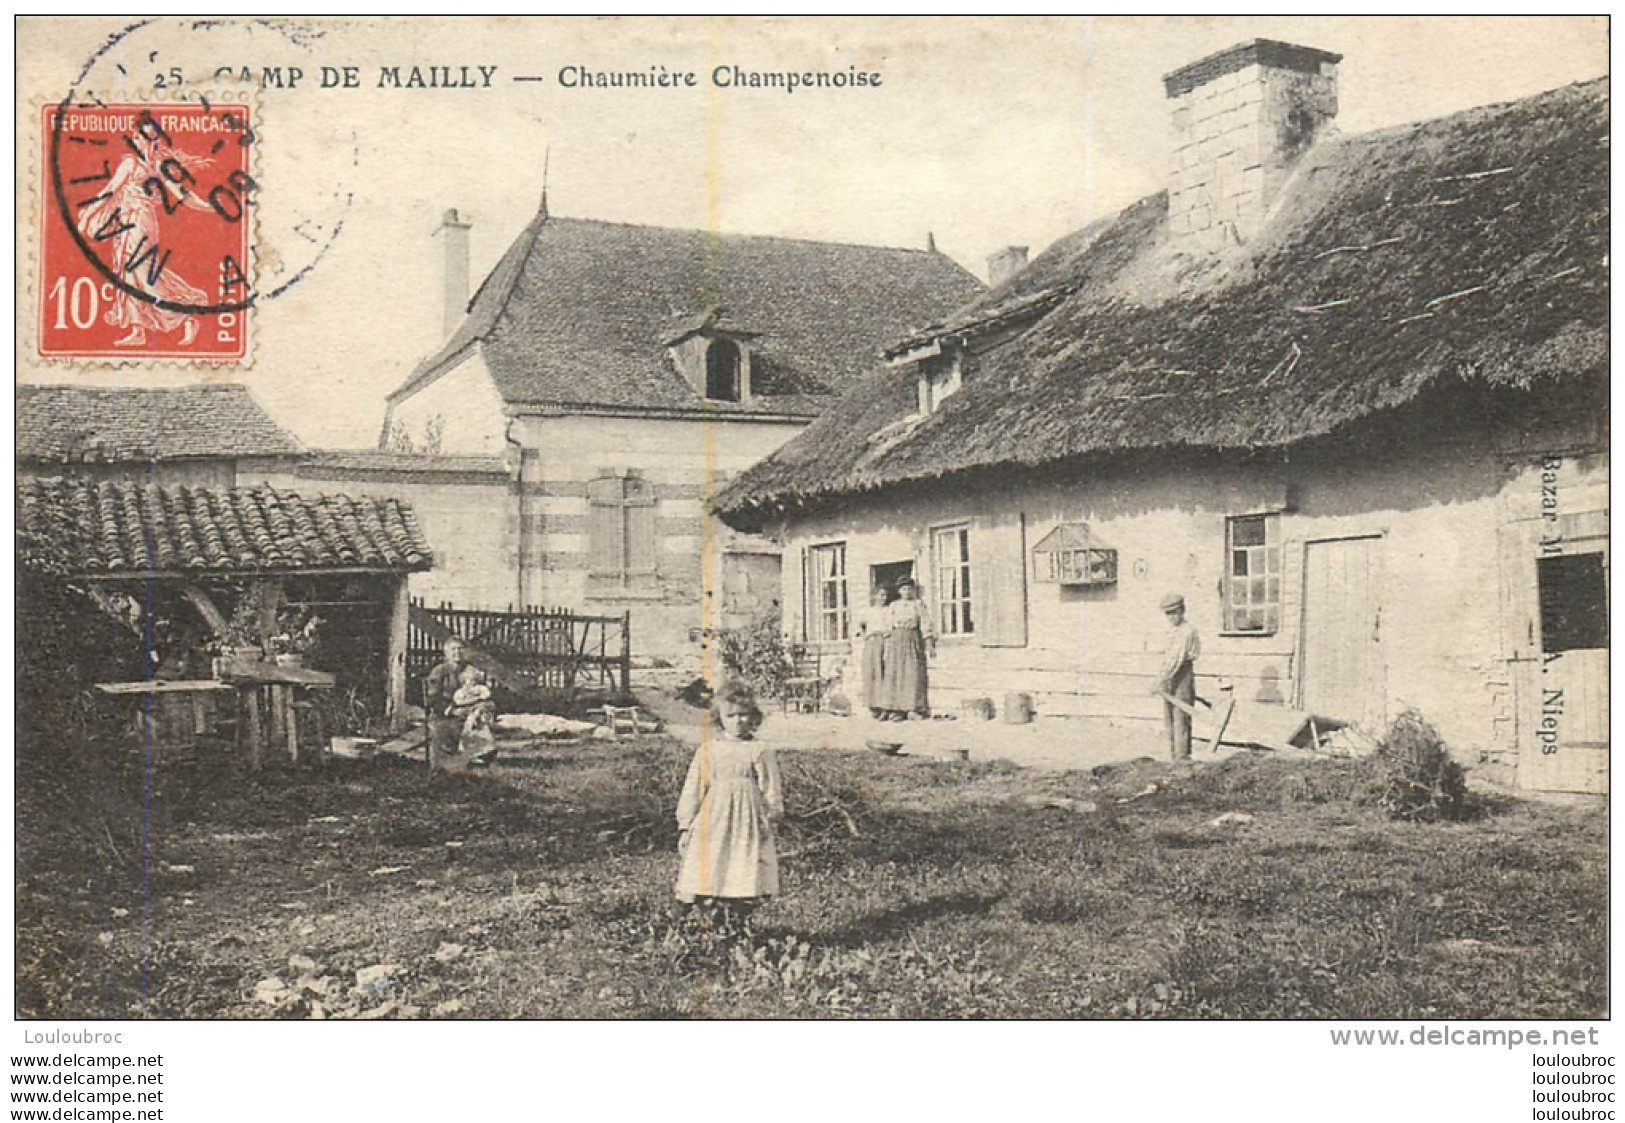 CAMP DE MAILLY CHAUMIERE CHAMPENOISE - Mailly-le-Camp